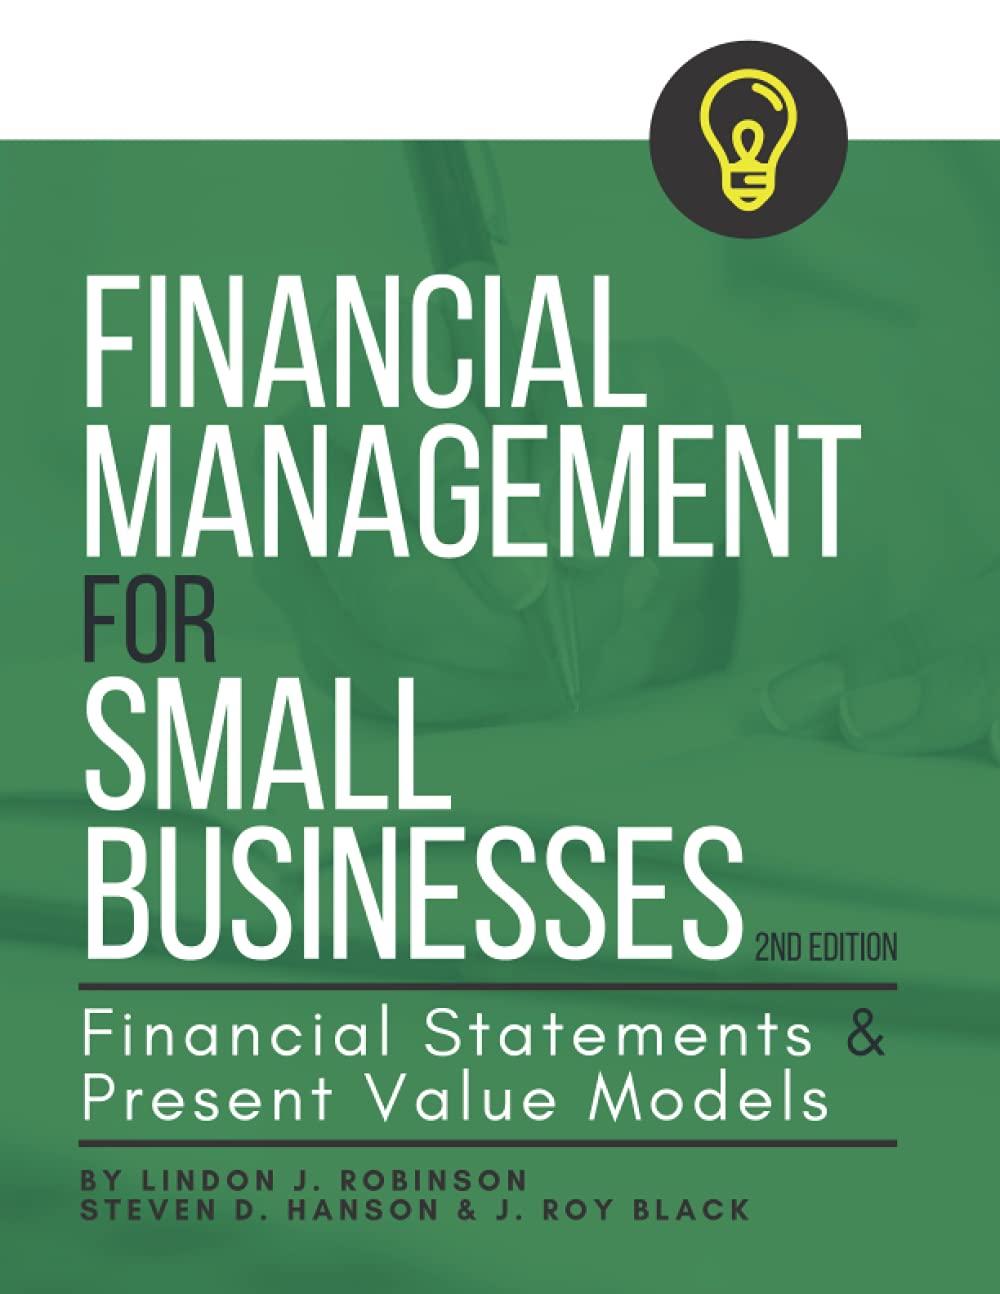 financial management for small businesses financial statements and present value models 2nd edition lindon j.